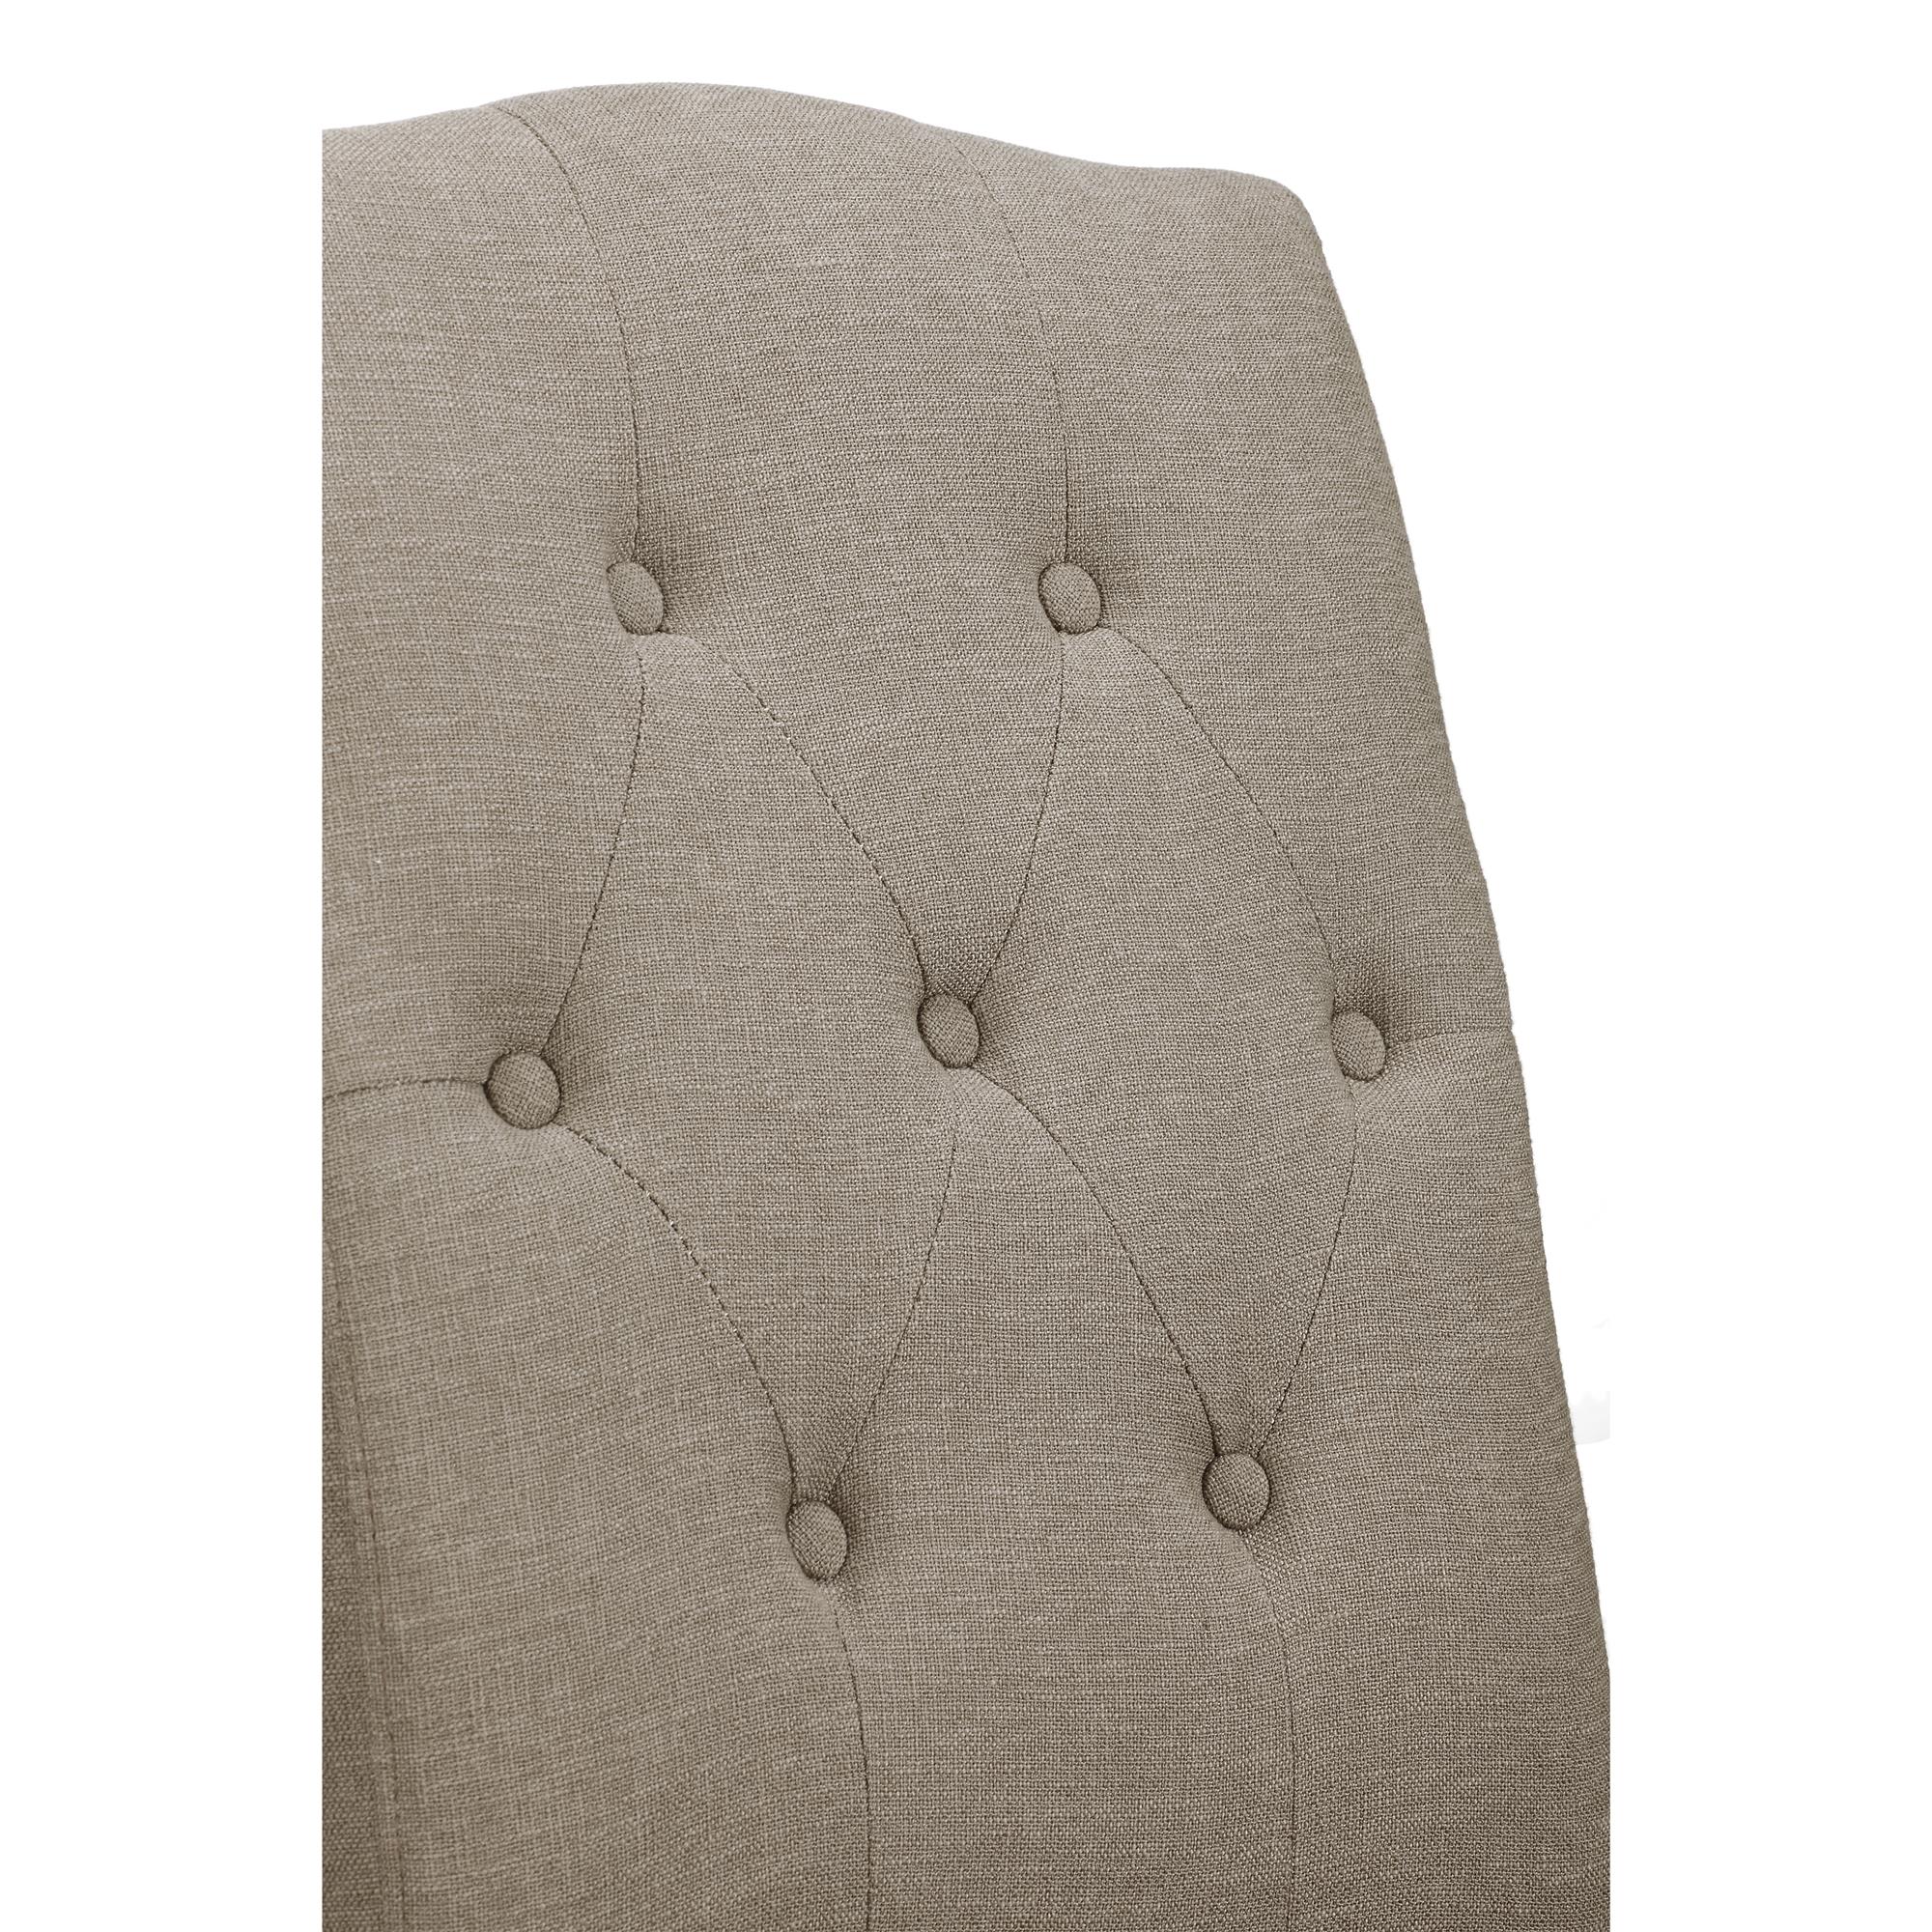 Better Homes and Gardens Parsons Upholstered Tufted Dining Chair,Taupe - image 5 of 9